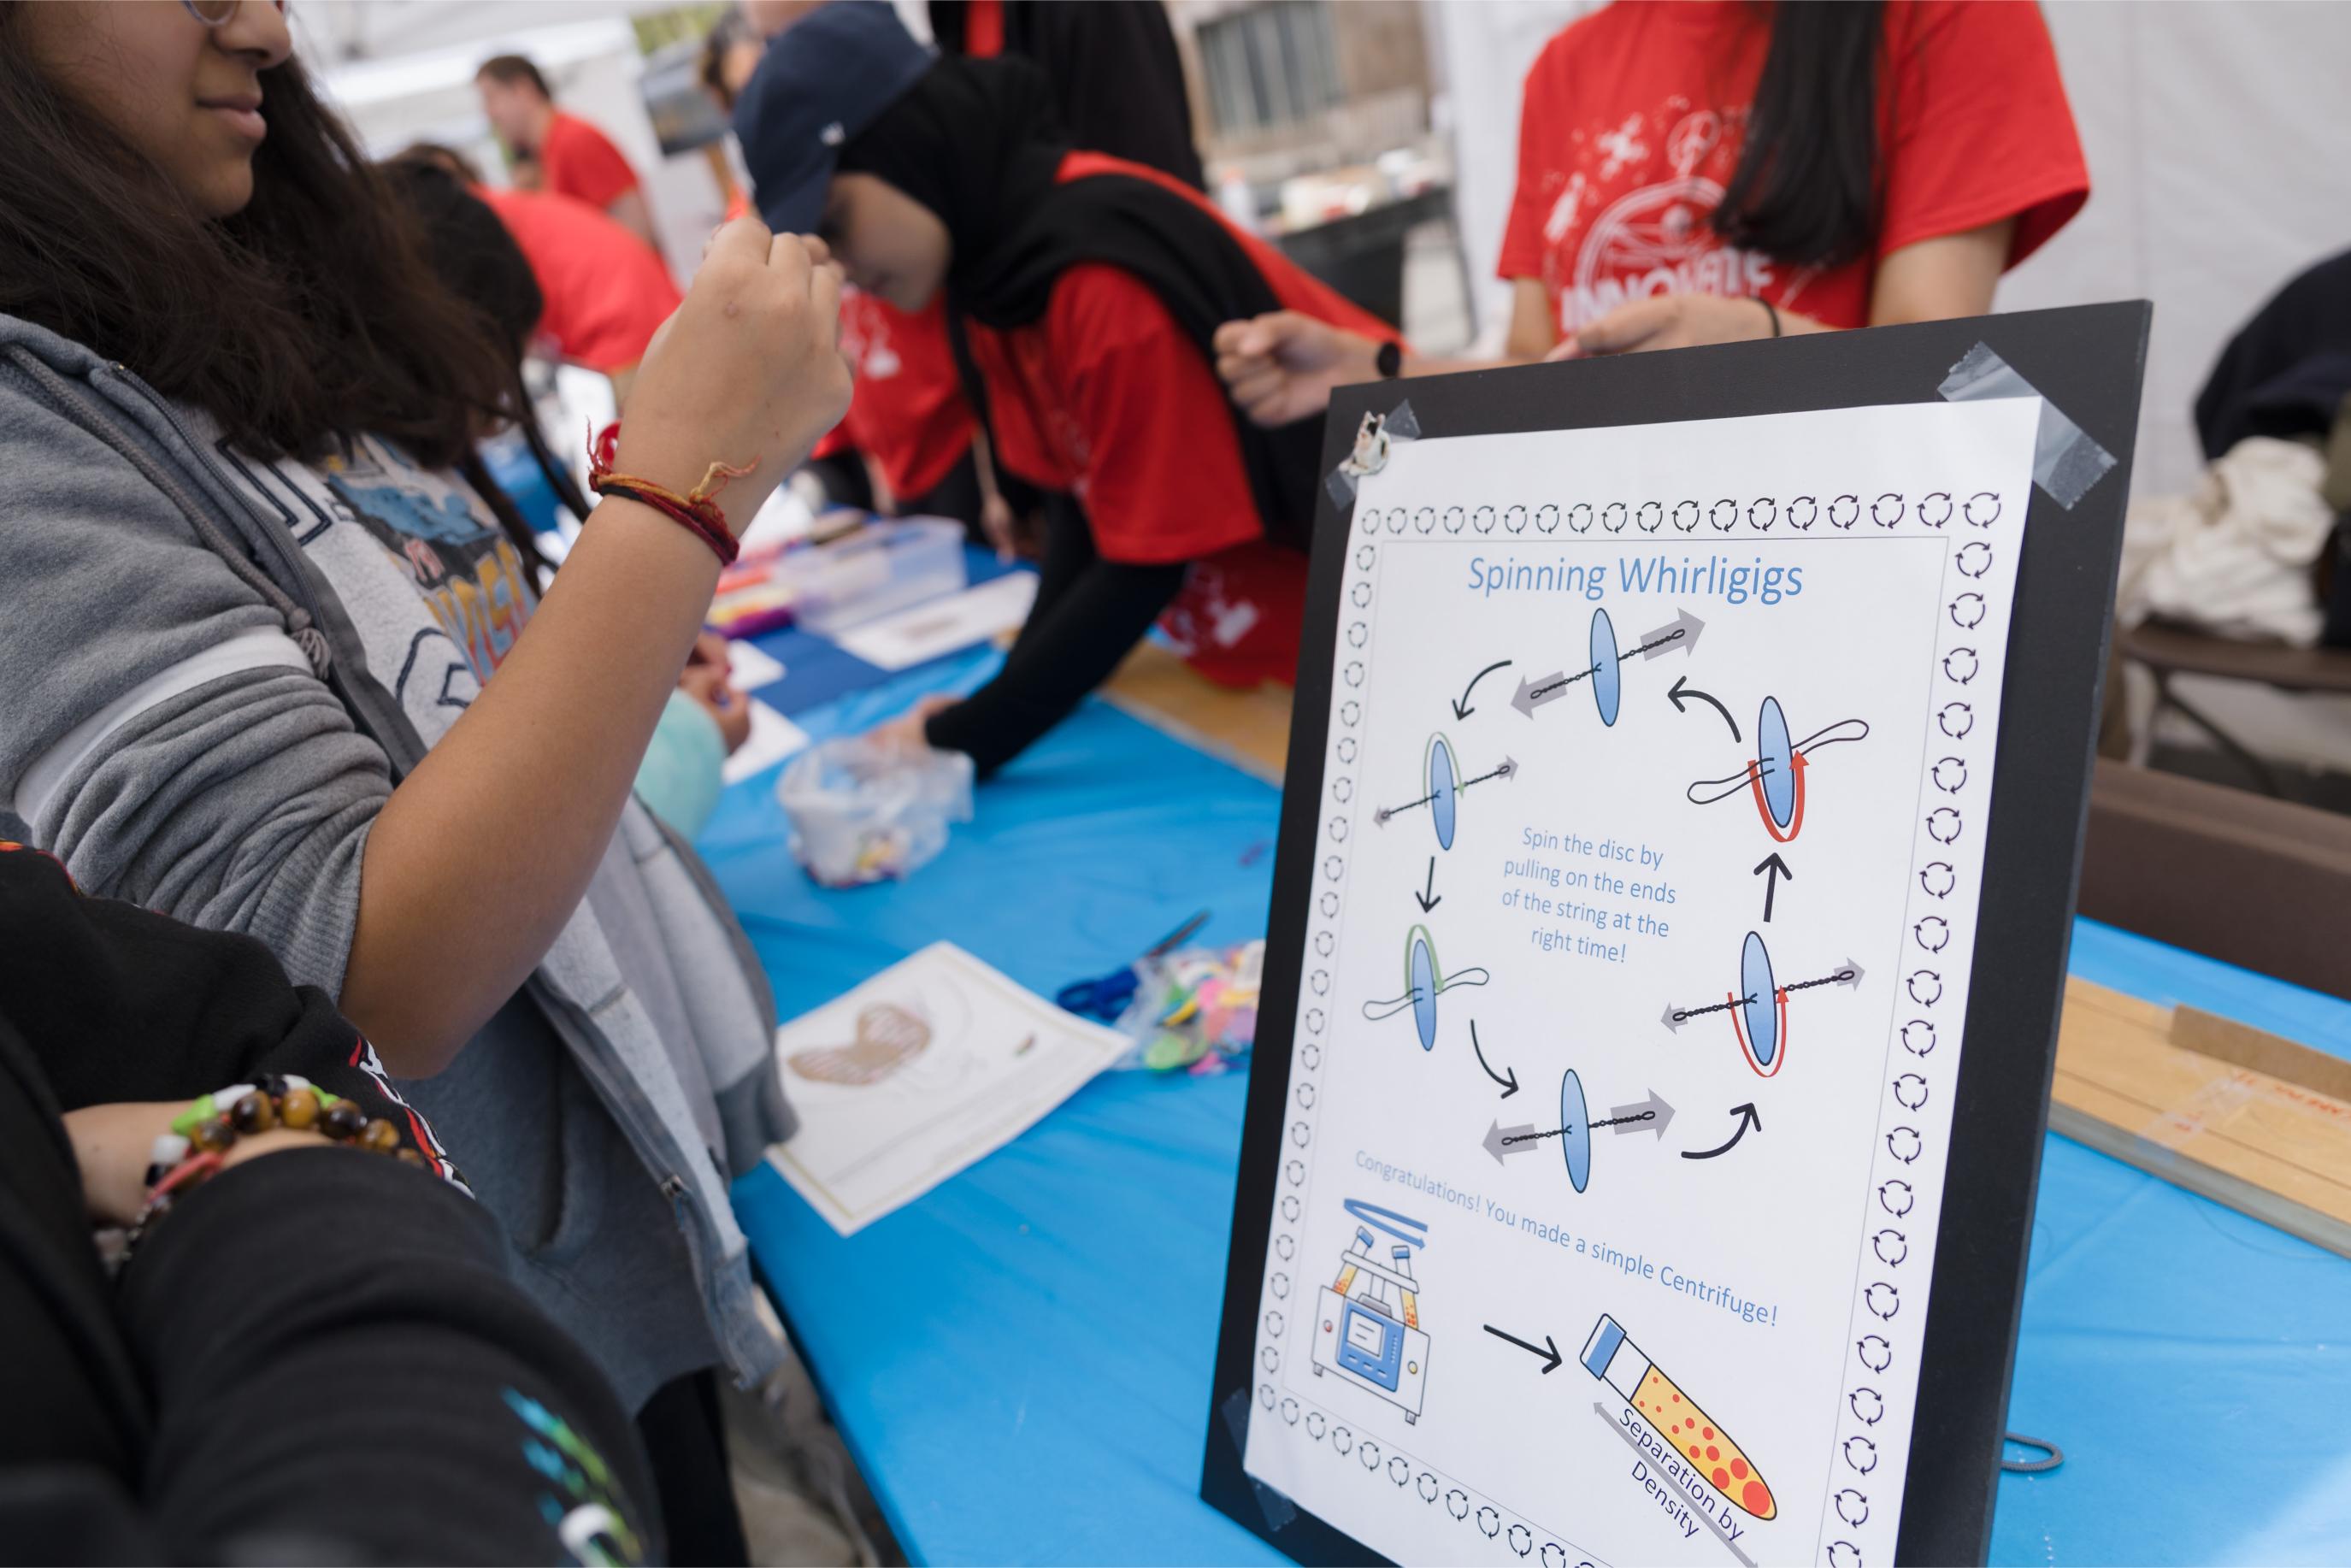 A presentation board showing how to play with spinning whirligigs at the Fun with Physics Booth.